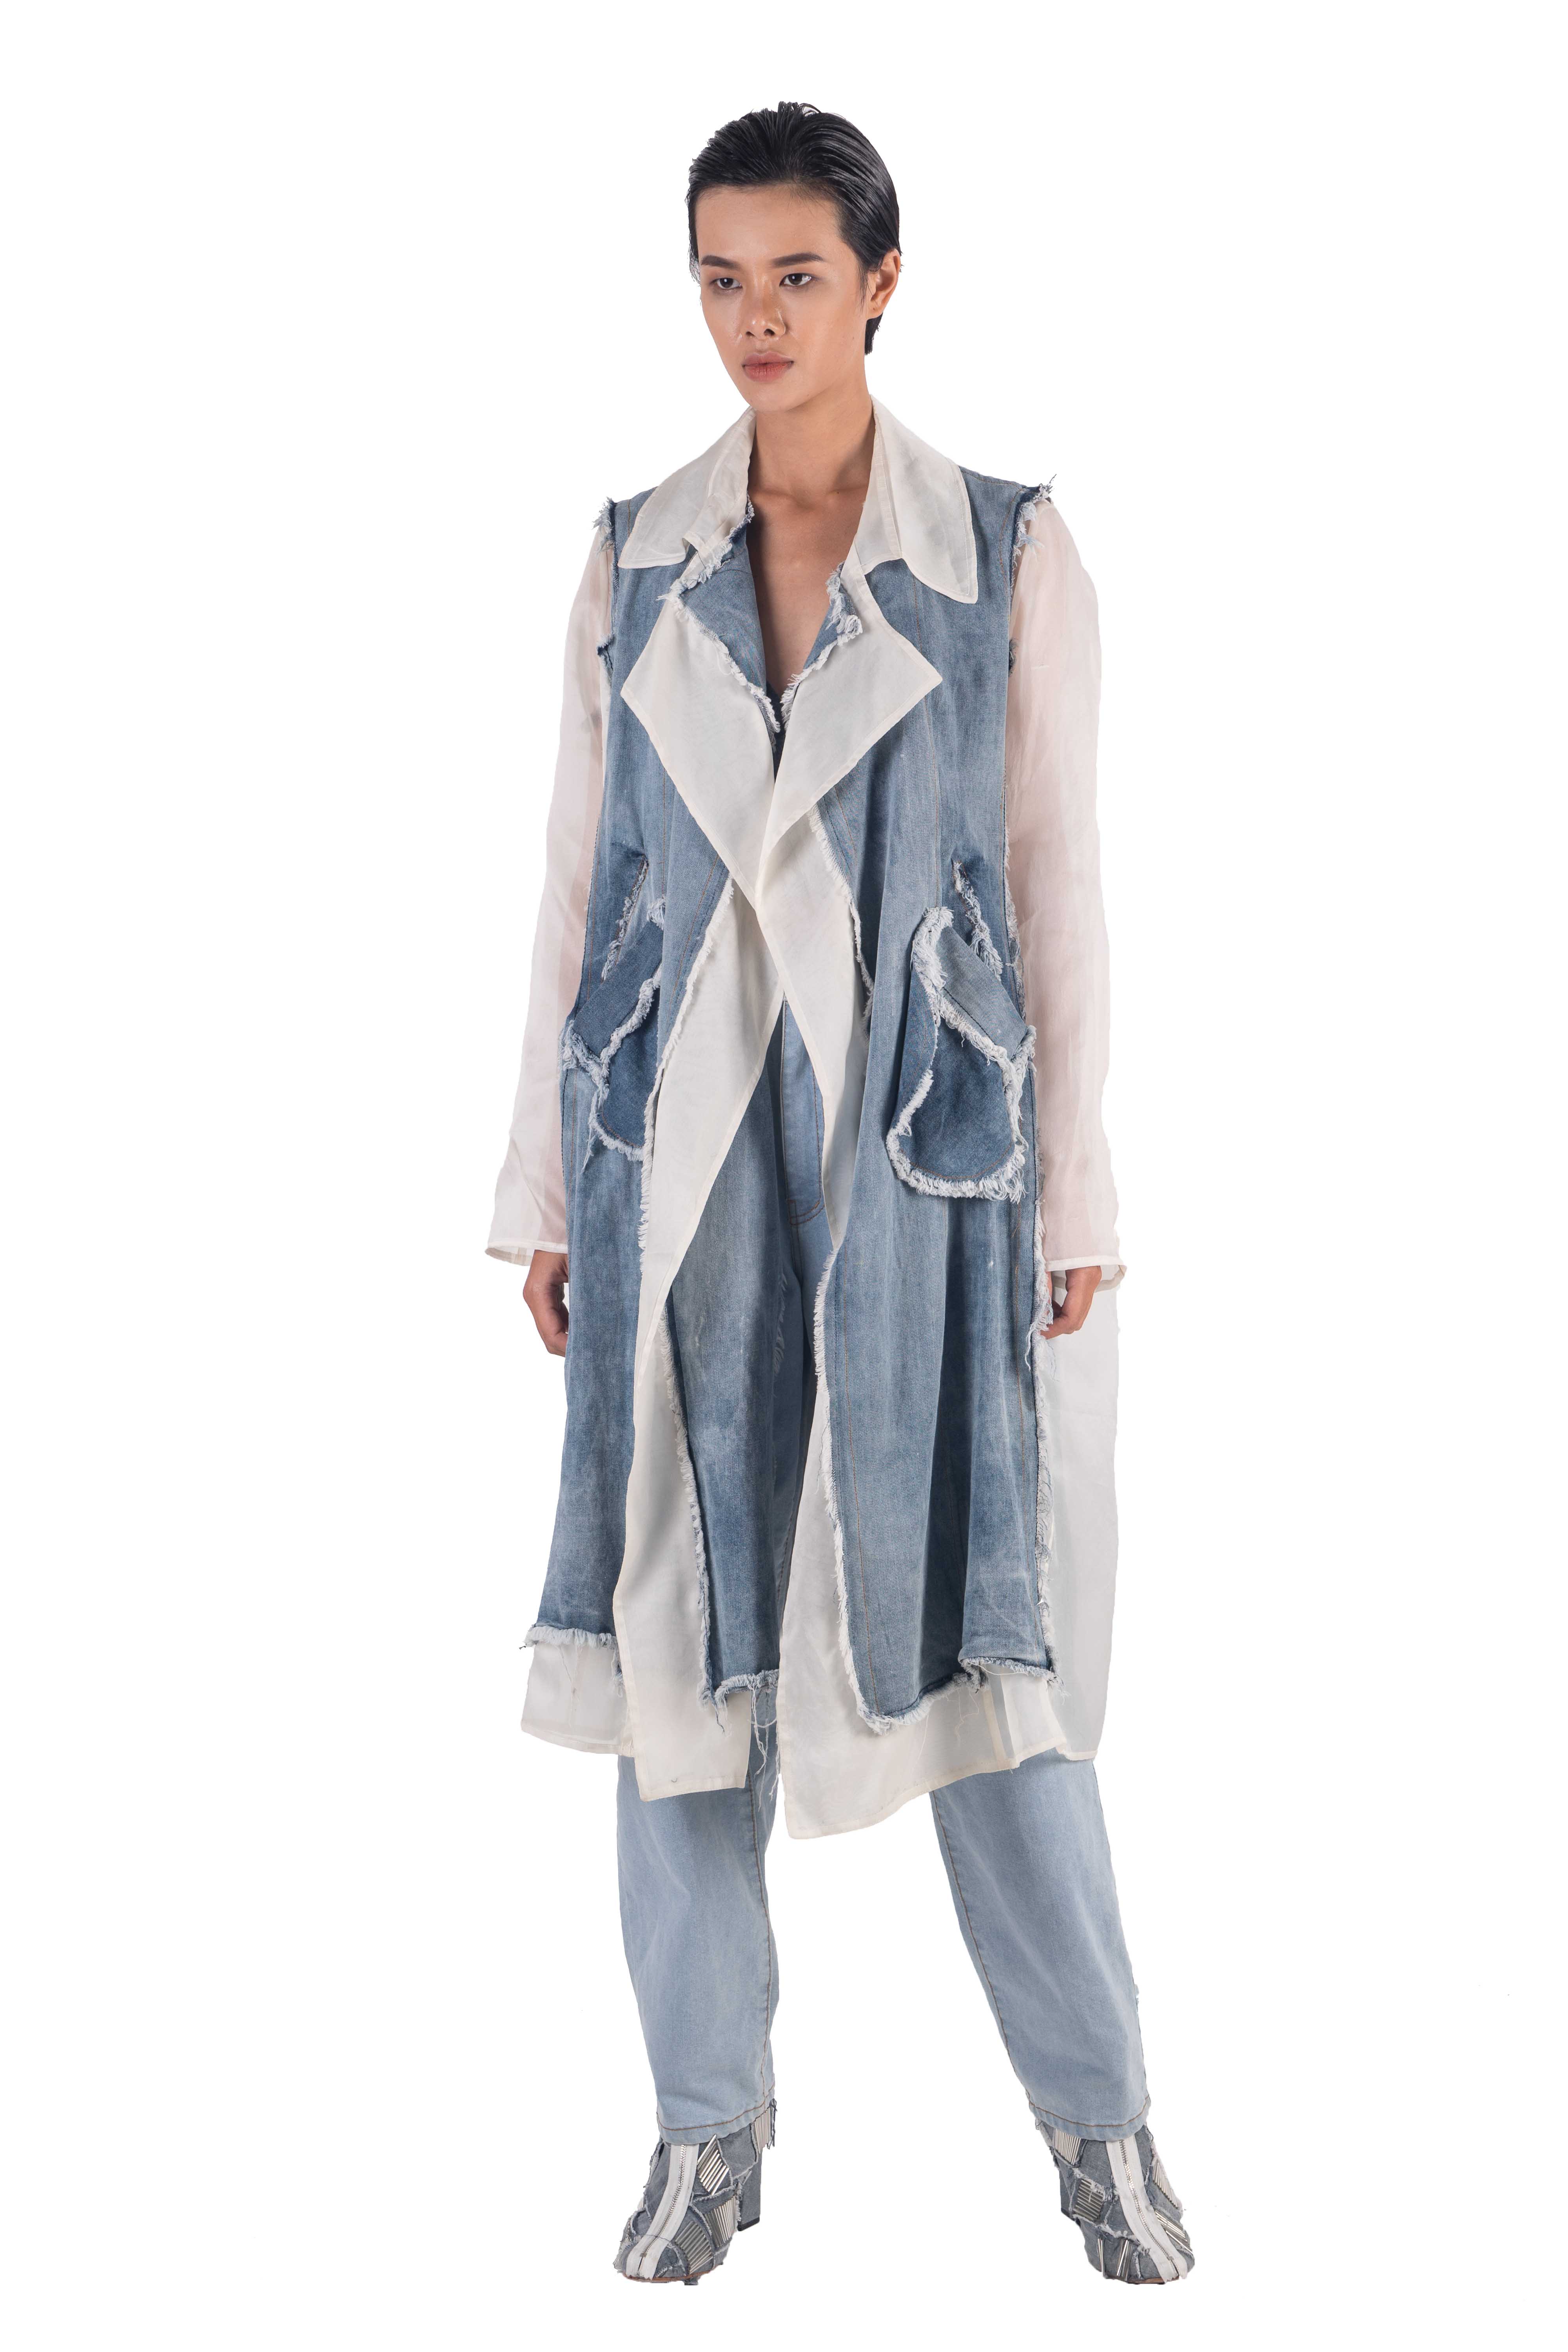 Contrasting white silk organza and washed denim panels coat with frayed egdes